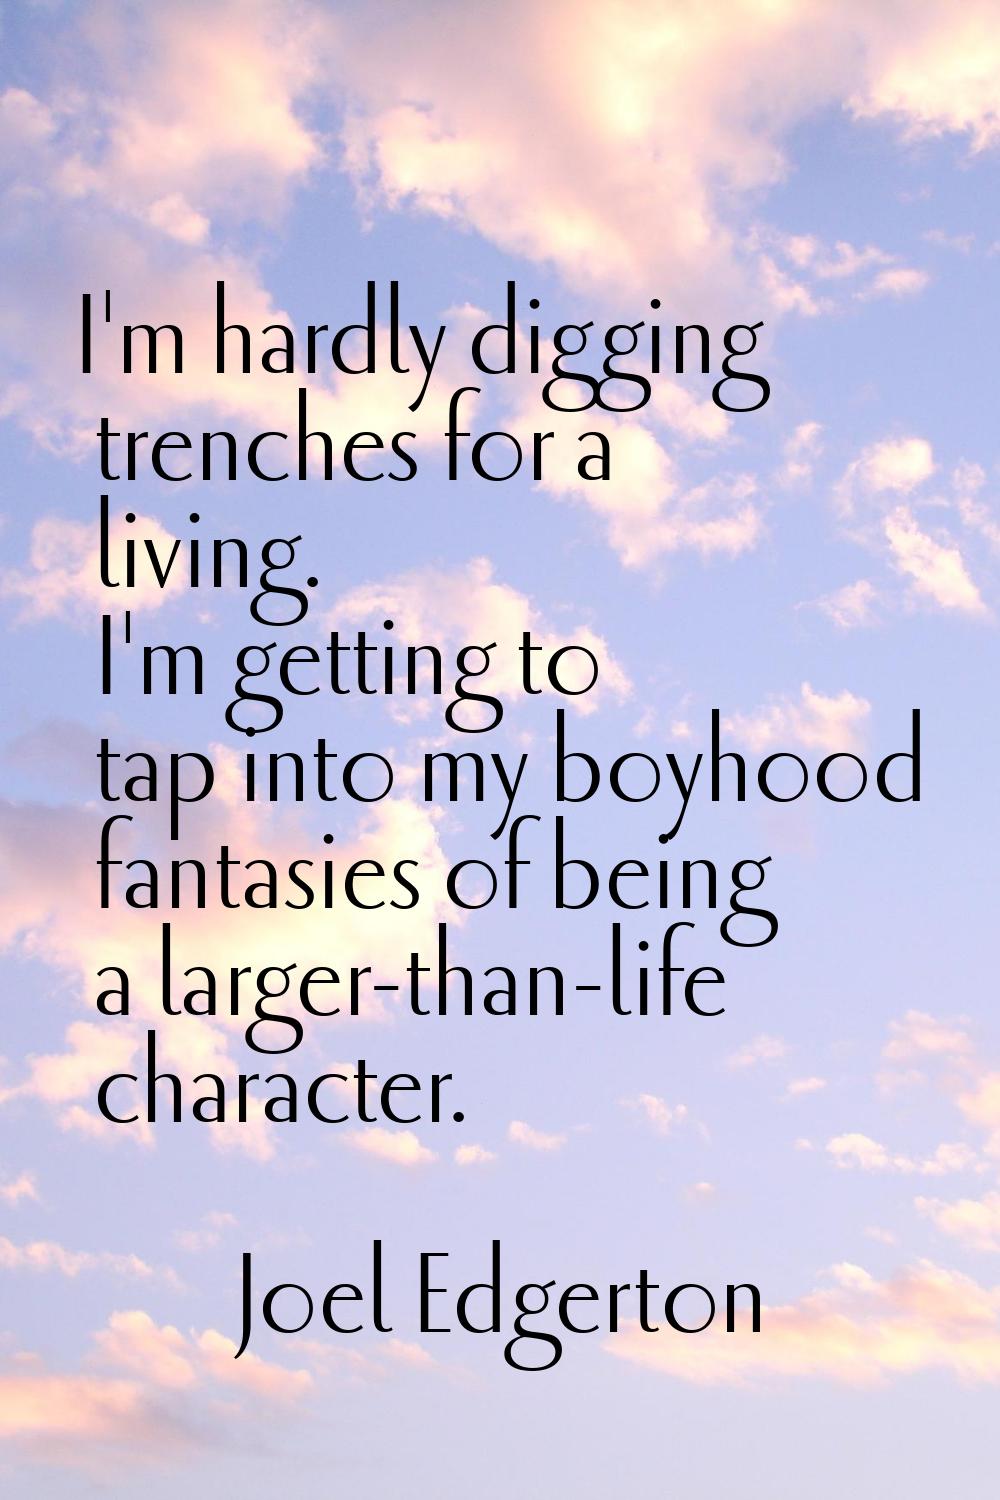 I'm hardly digging trenches for a living. I'm getting to tap into my boyhood fantasies of being a l